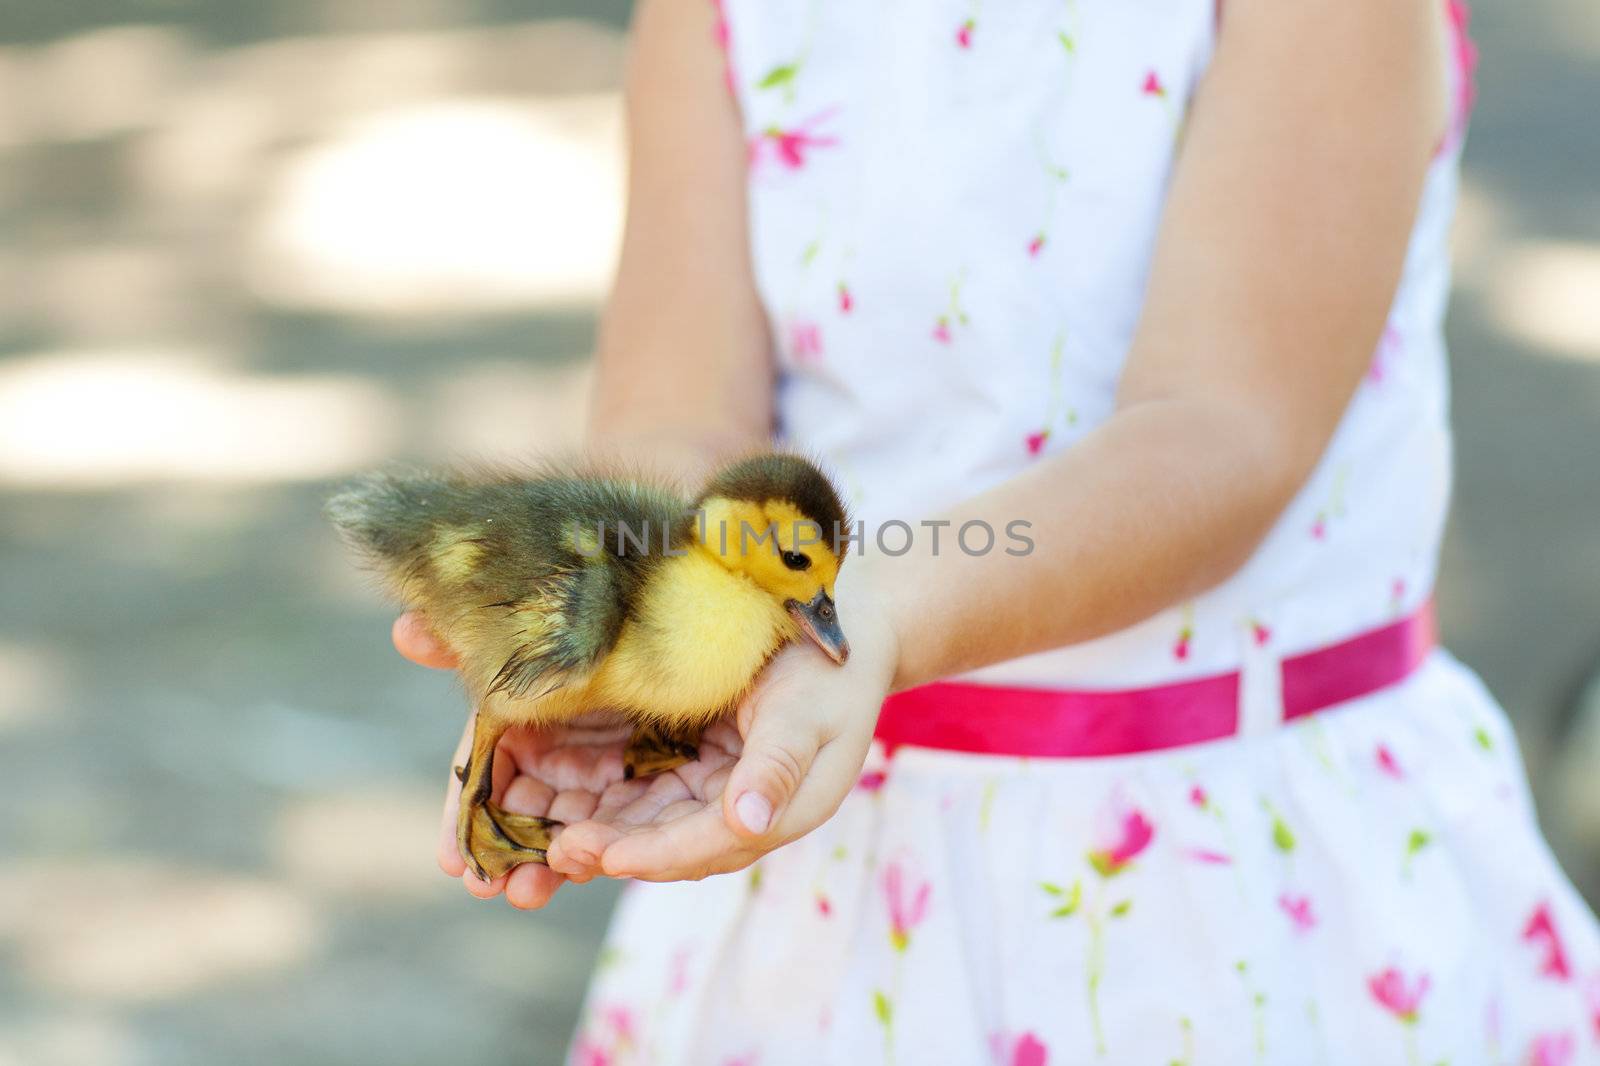 duck in hands of the child by vsurkov